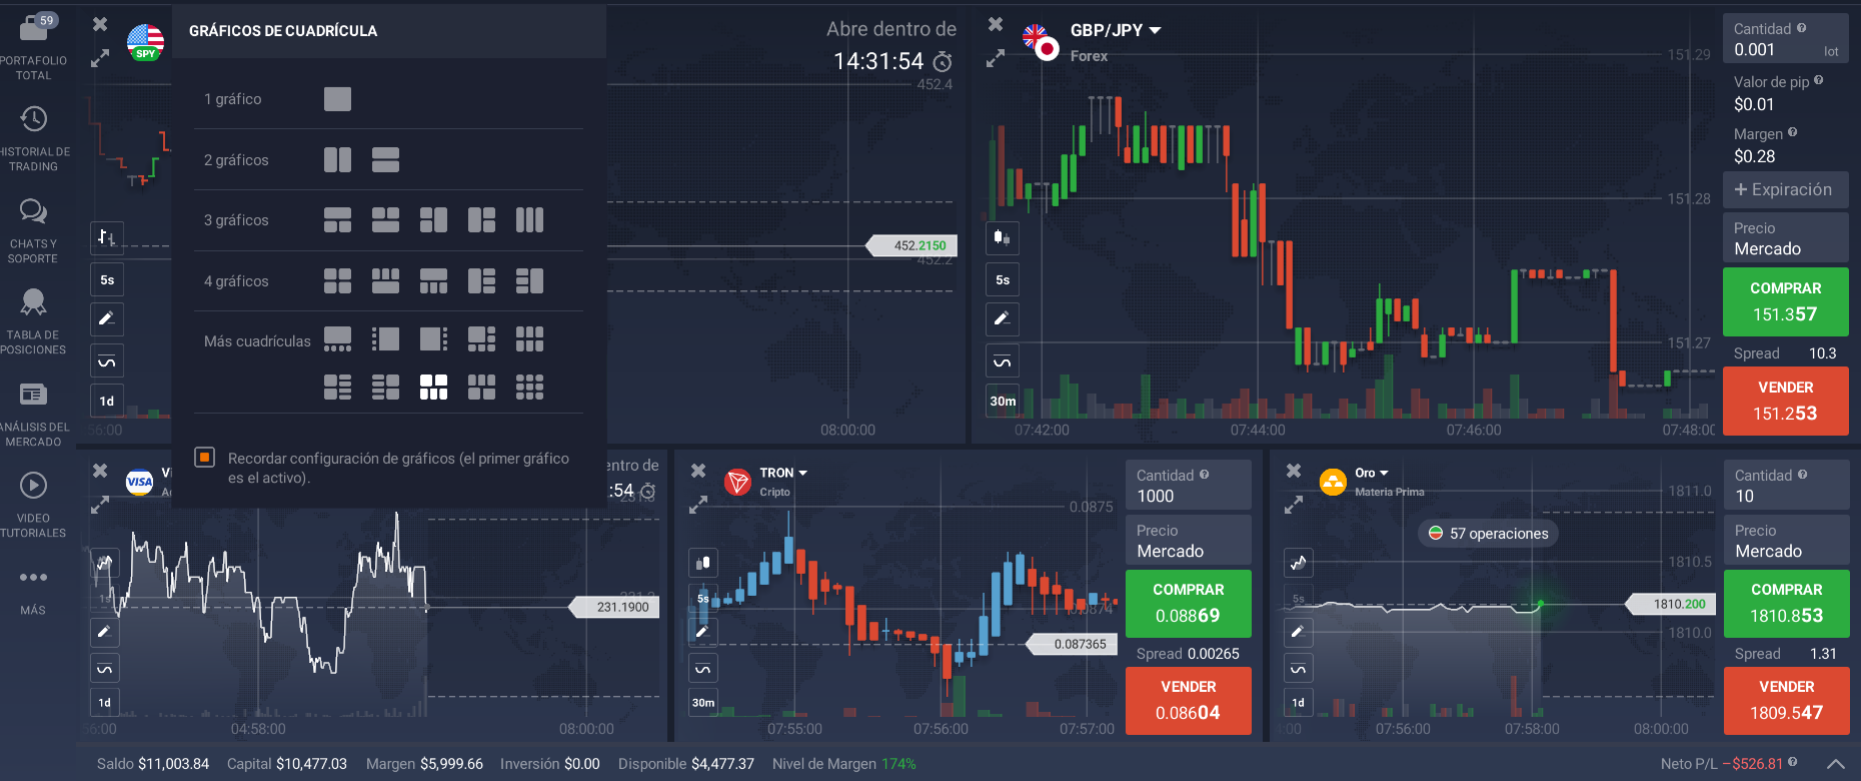 Trade multiple assets at once